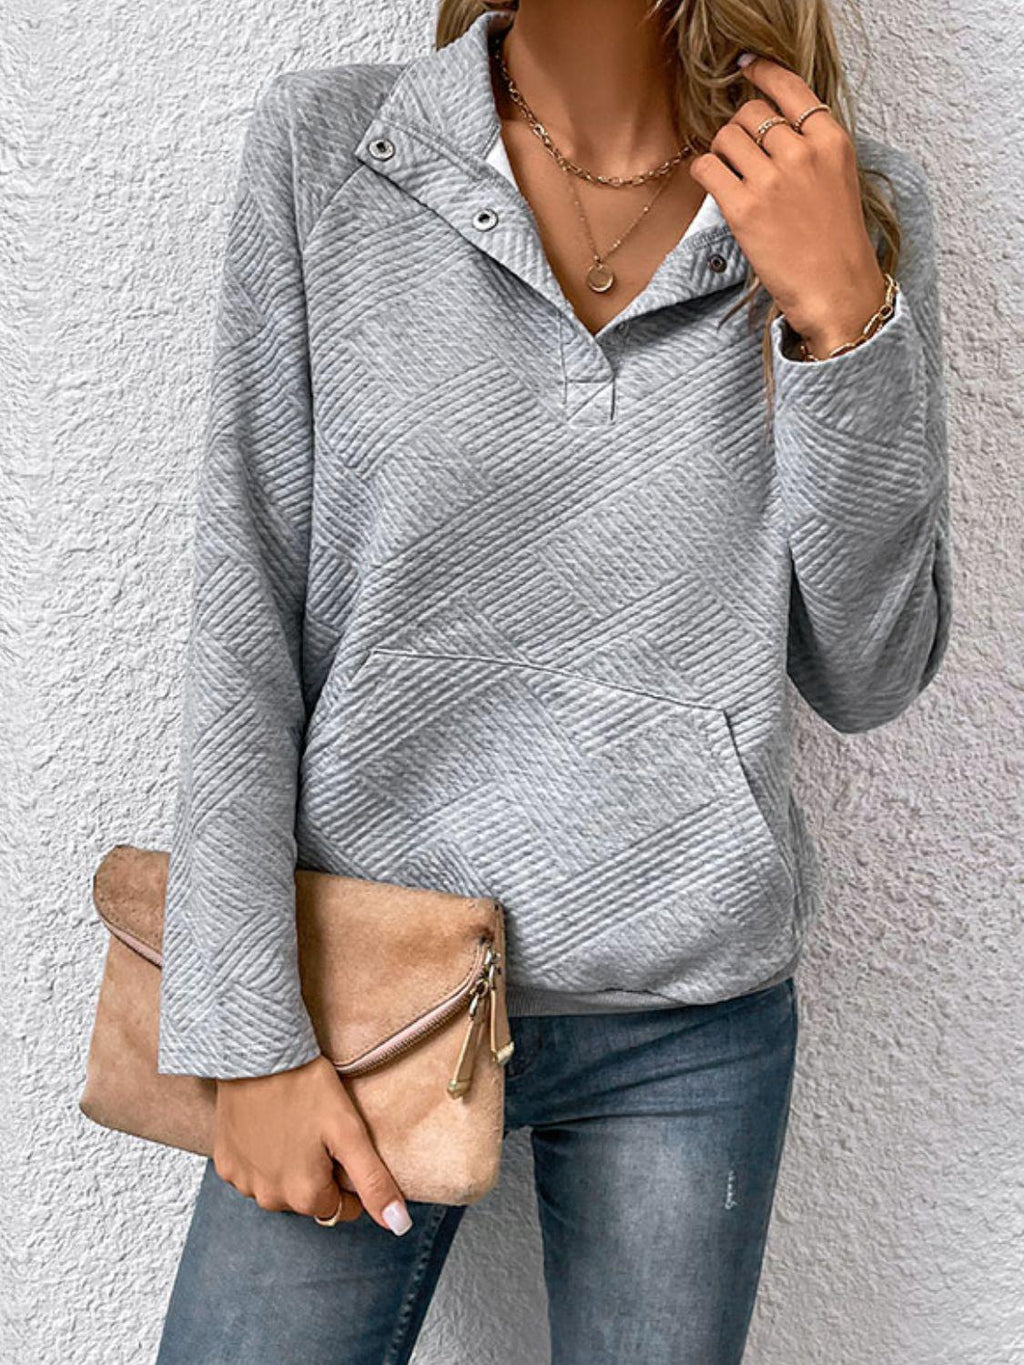 Raglan Sleeve Collared Neck Sweatshirt with Pocket-Tops-Boutique Top, Hundredth, Ship From Overseas, Top, Tops-Light Gray-S-[option4]-[option5]-[option6]-Womens-USA-Clothing-Boutique-Shop-Online-Clothes Minded